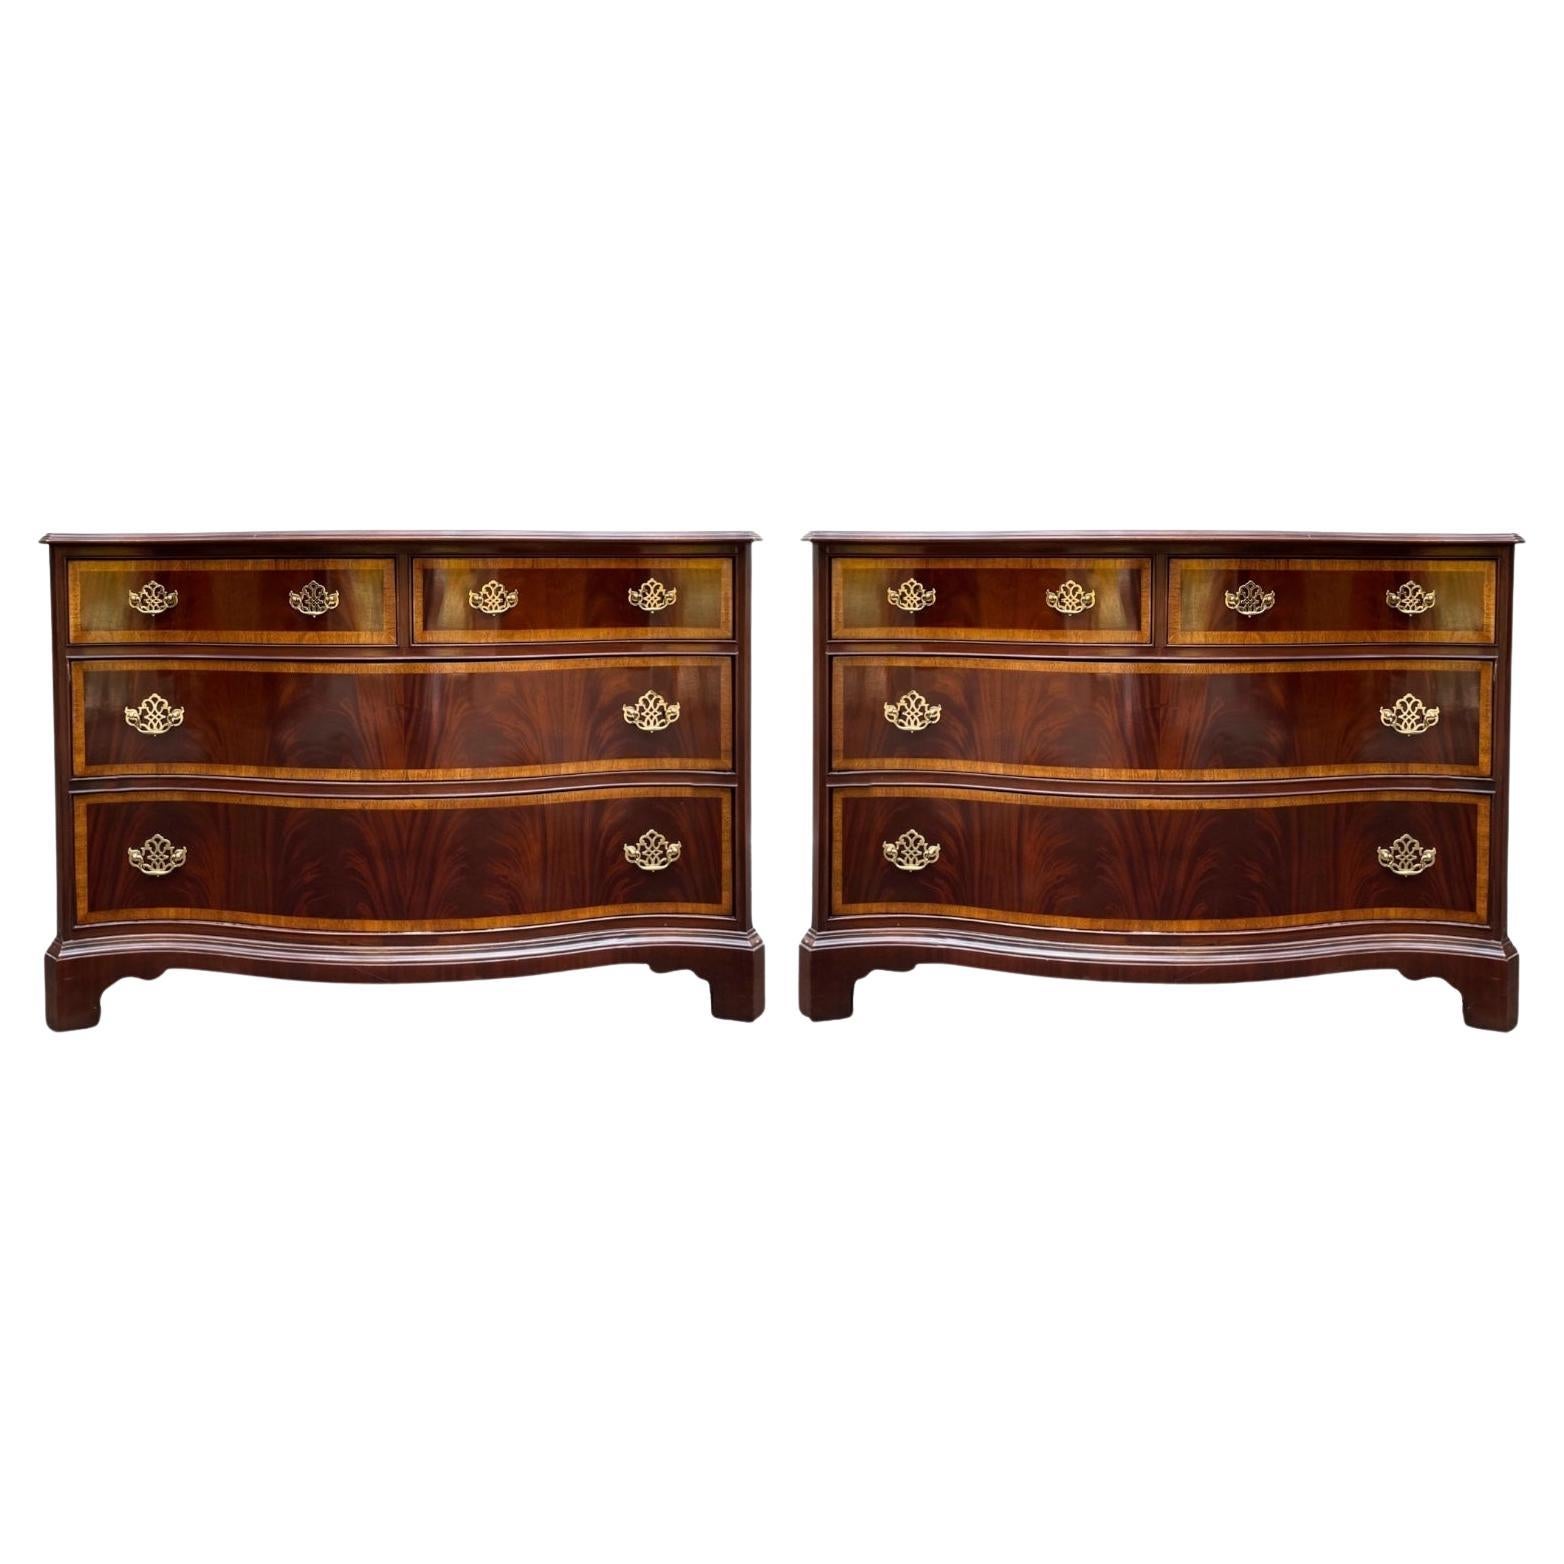 These Chinese Chippendale flame mahogany and satinwood banded serpentine chests are by Hickory Furniture. They have timeless elegance and are in very good condition They are marked.